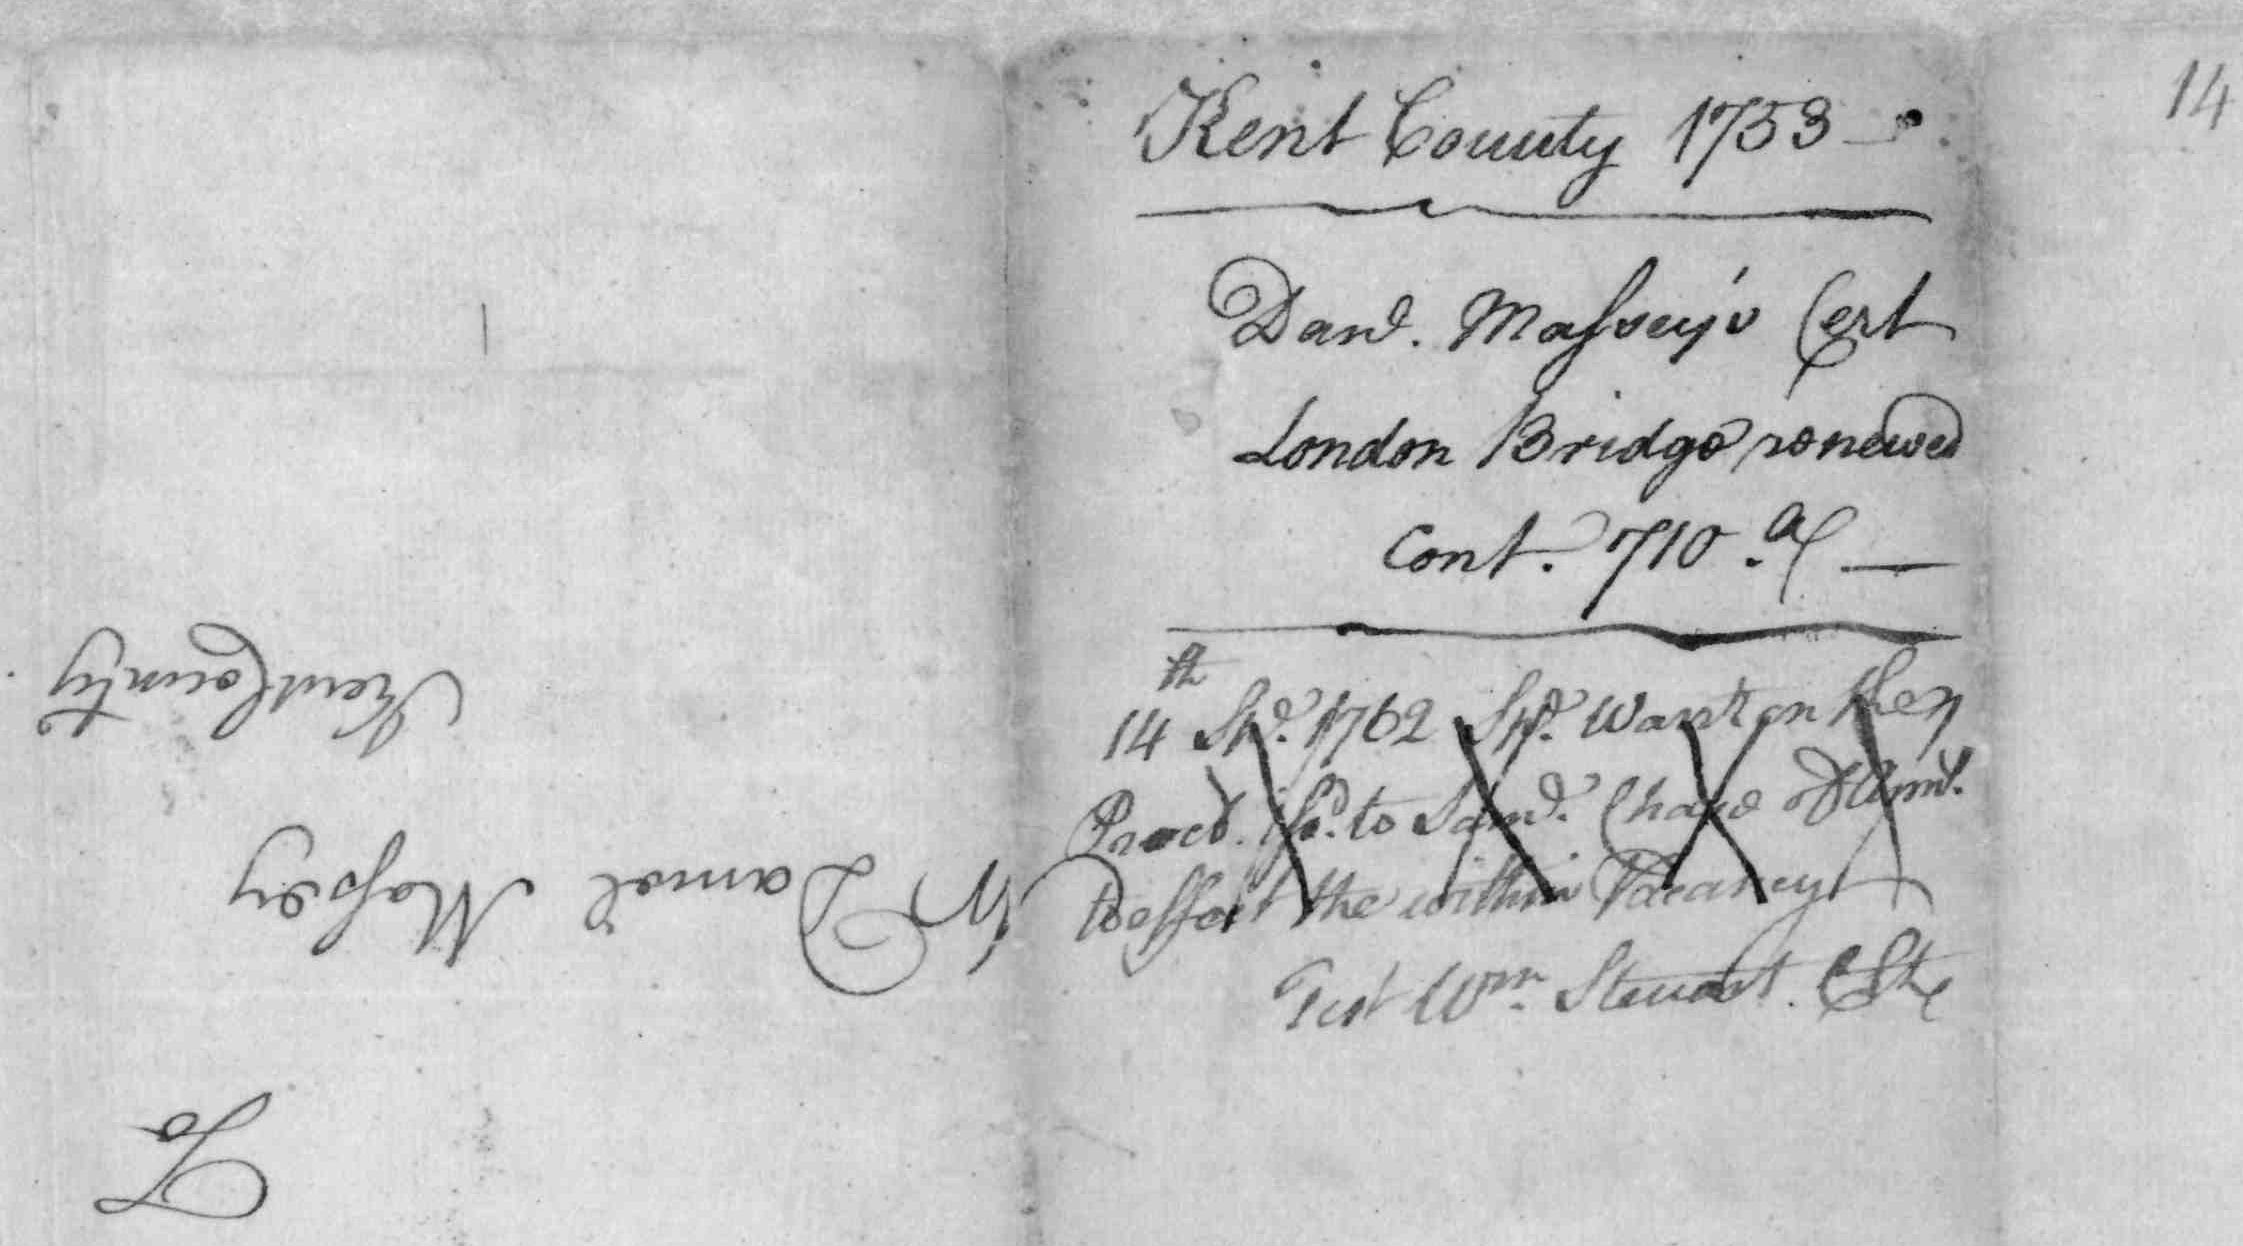 Maryland Land Records, Kent County, Unpatented Certificate #128, Daniel Massey, January 16, 1753 - from Maryland State Archives